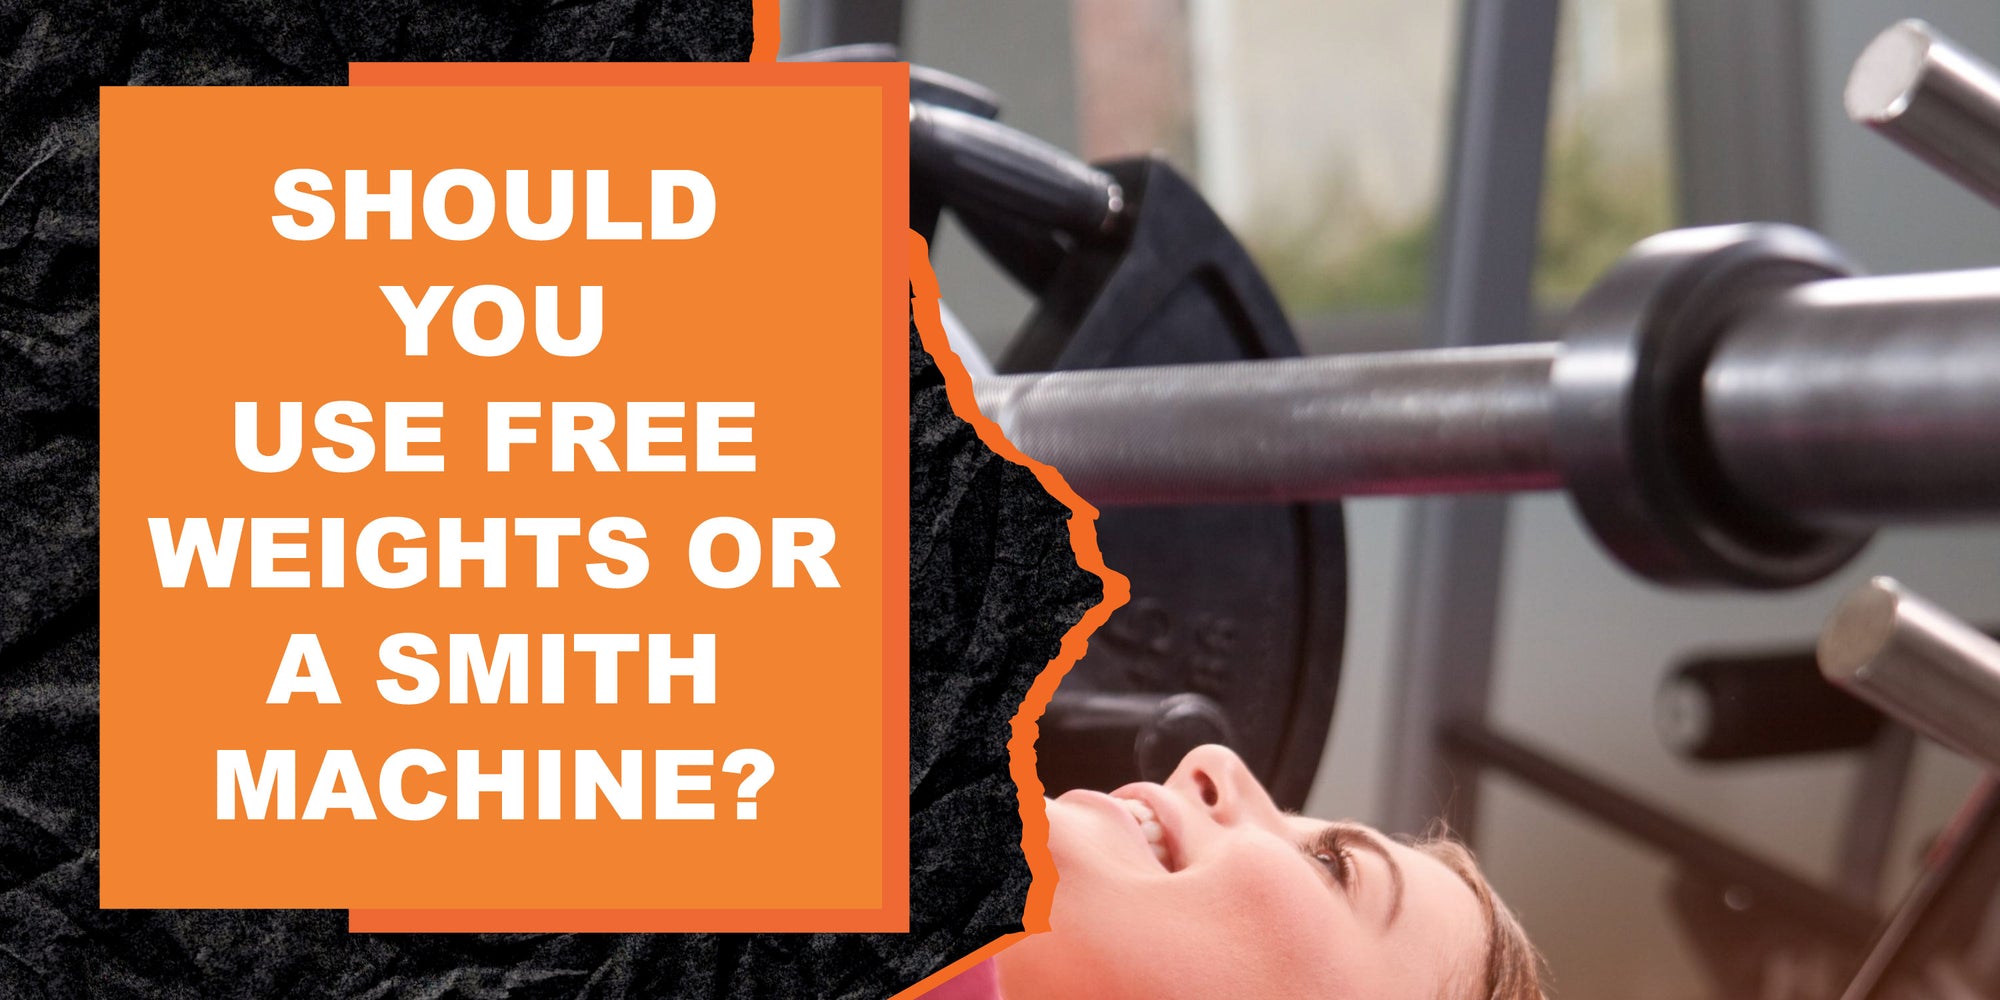 Should You Use Free Weights or a Smith Machine?